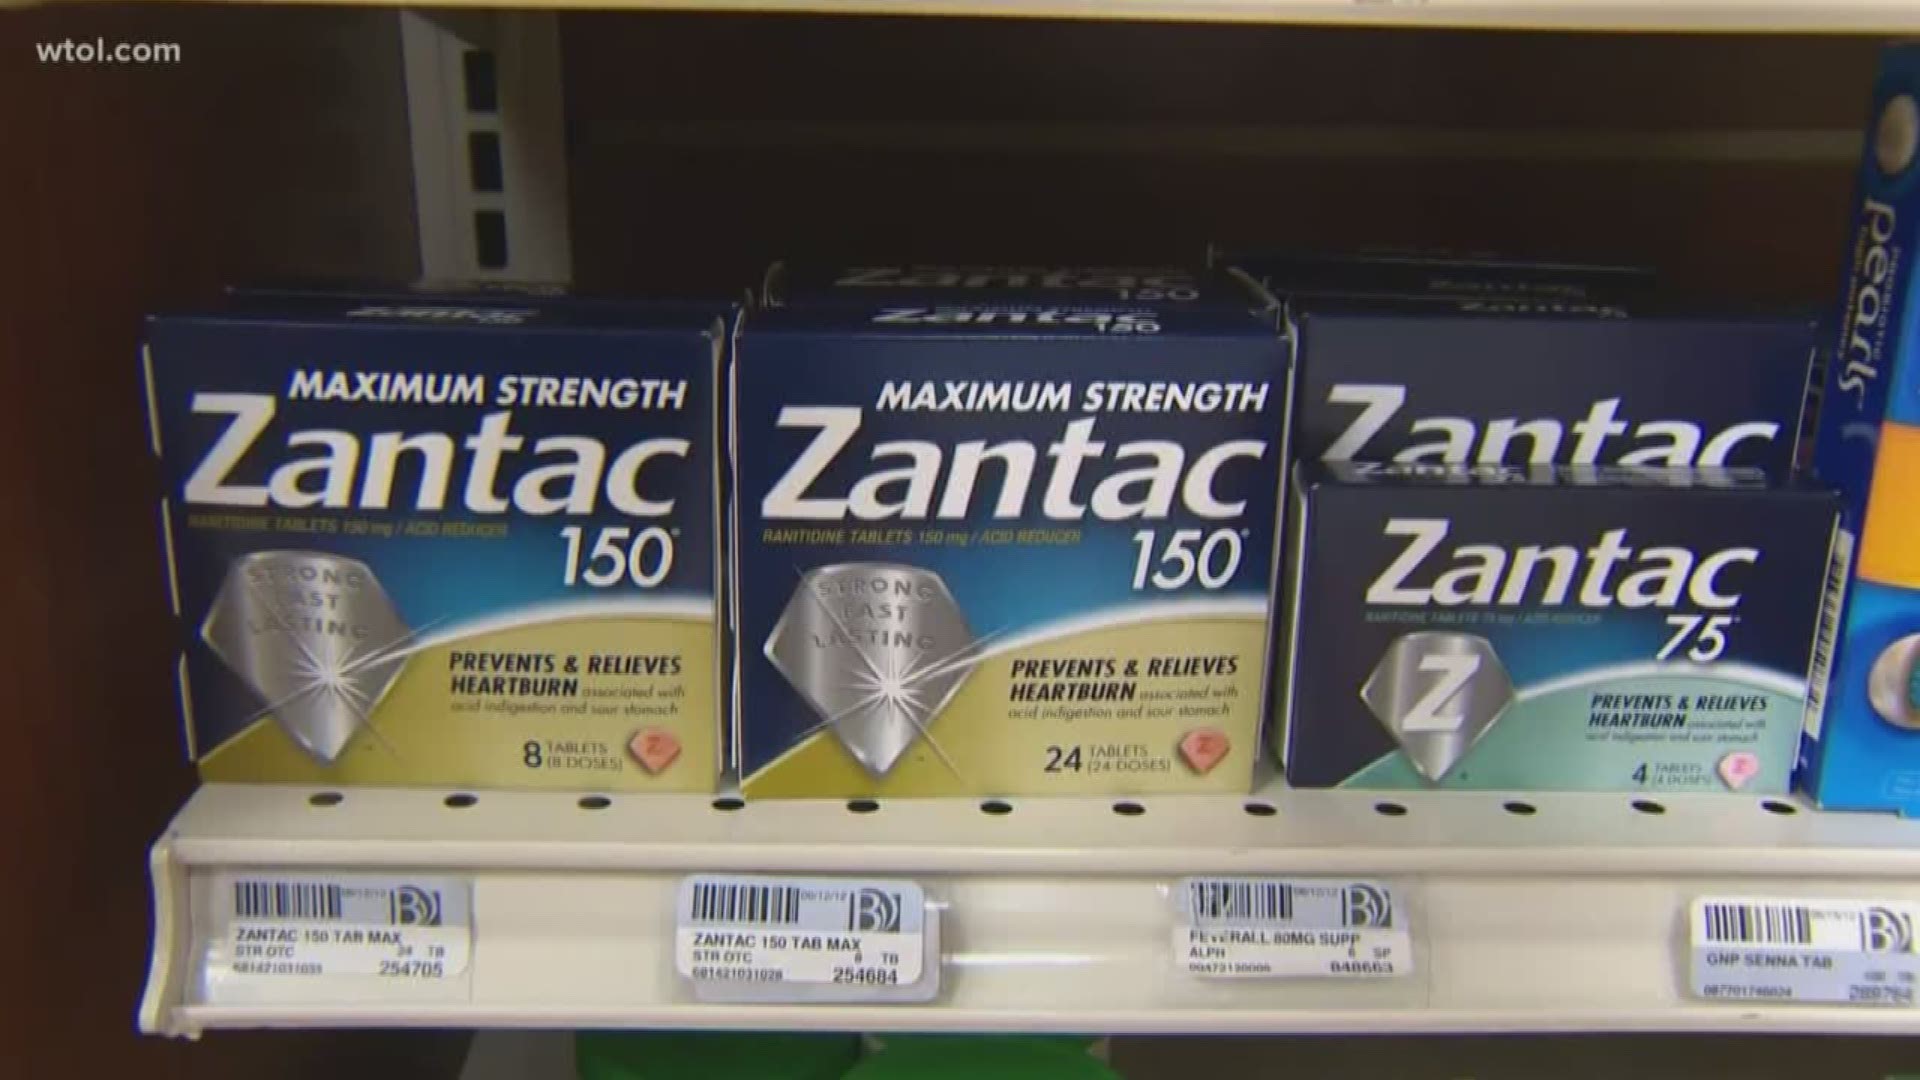 The FDA issues a safety alert for Zantac and its generic Ranitidine after the drug was found to have a chemical that could cause cancer.